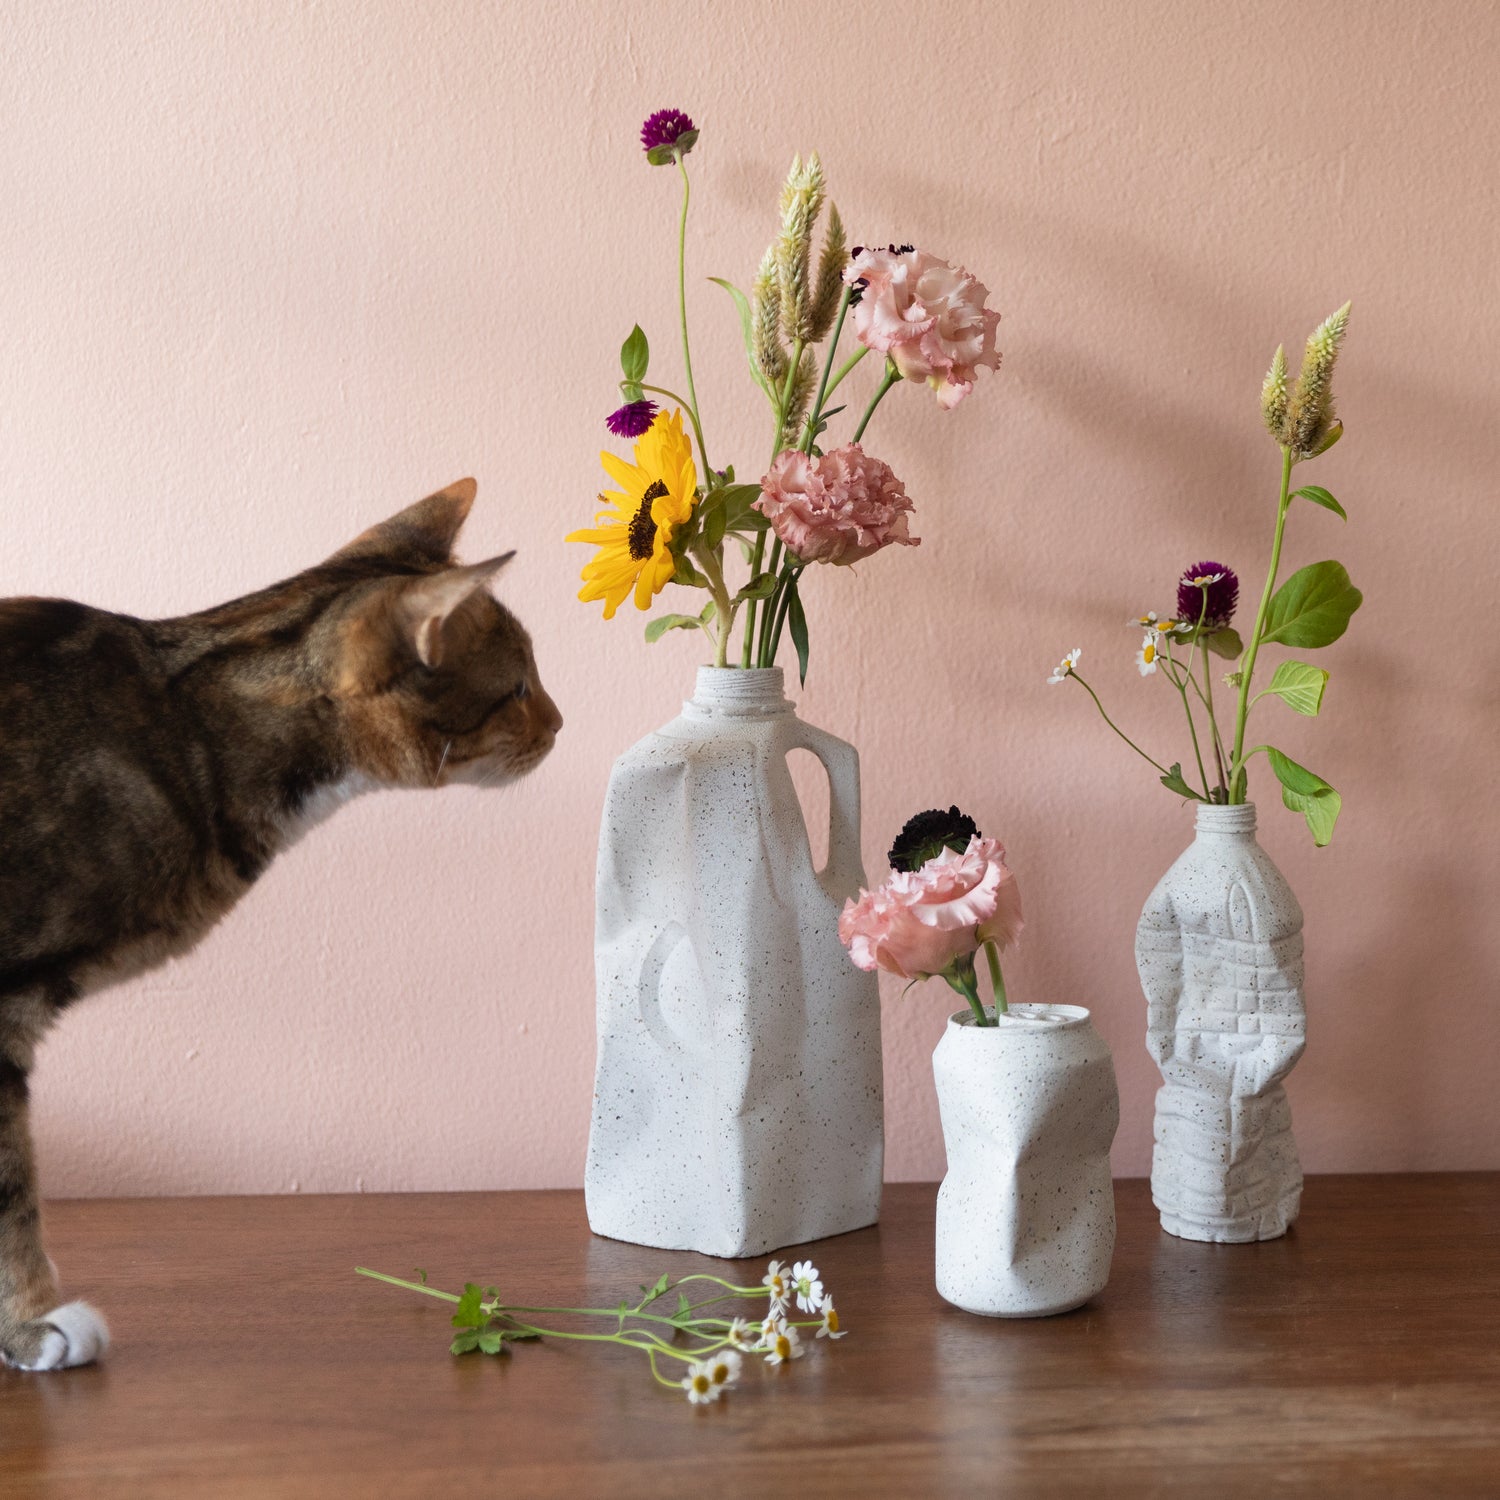 The Complete Set of Vases from our Garbage Collection in white terrazzo, styled with flowers.